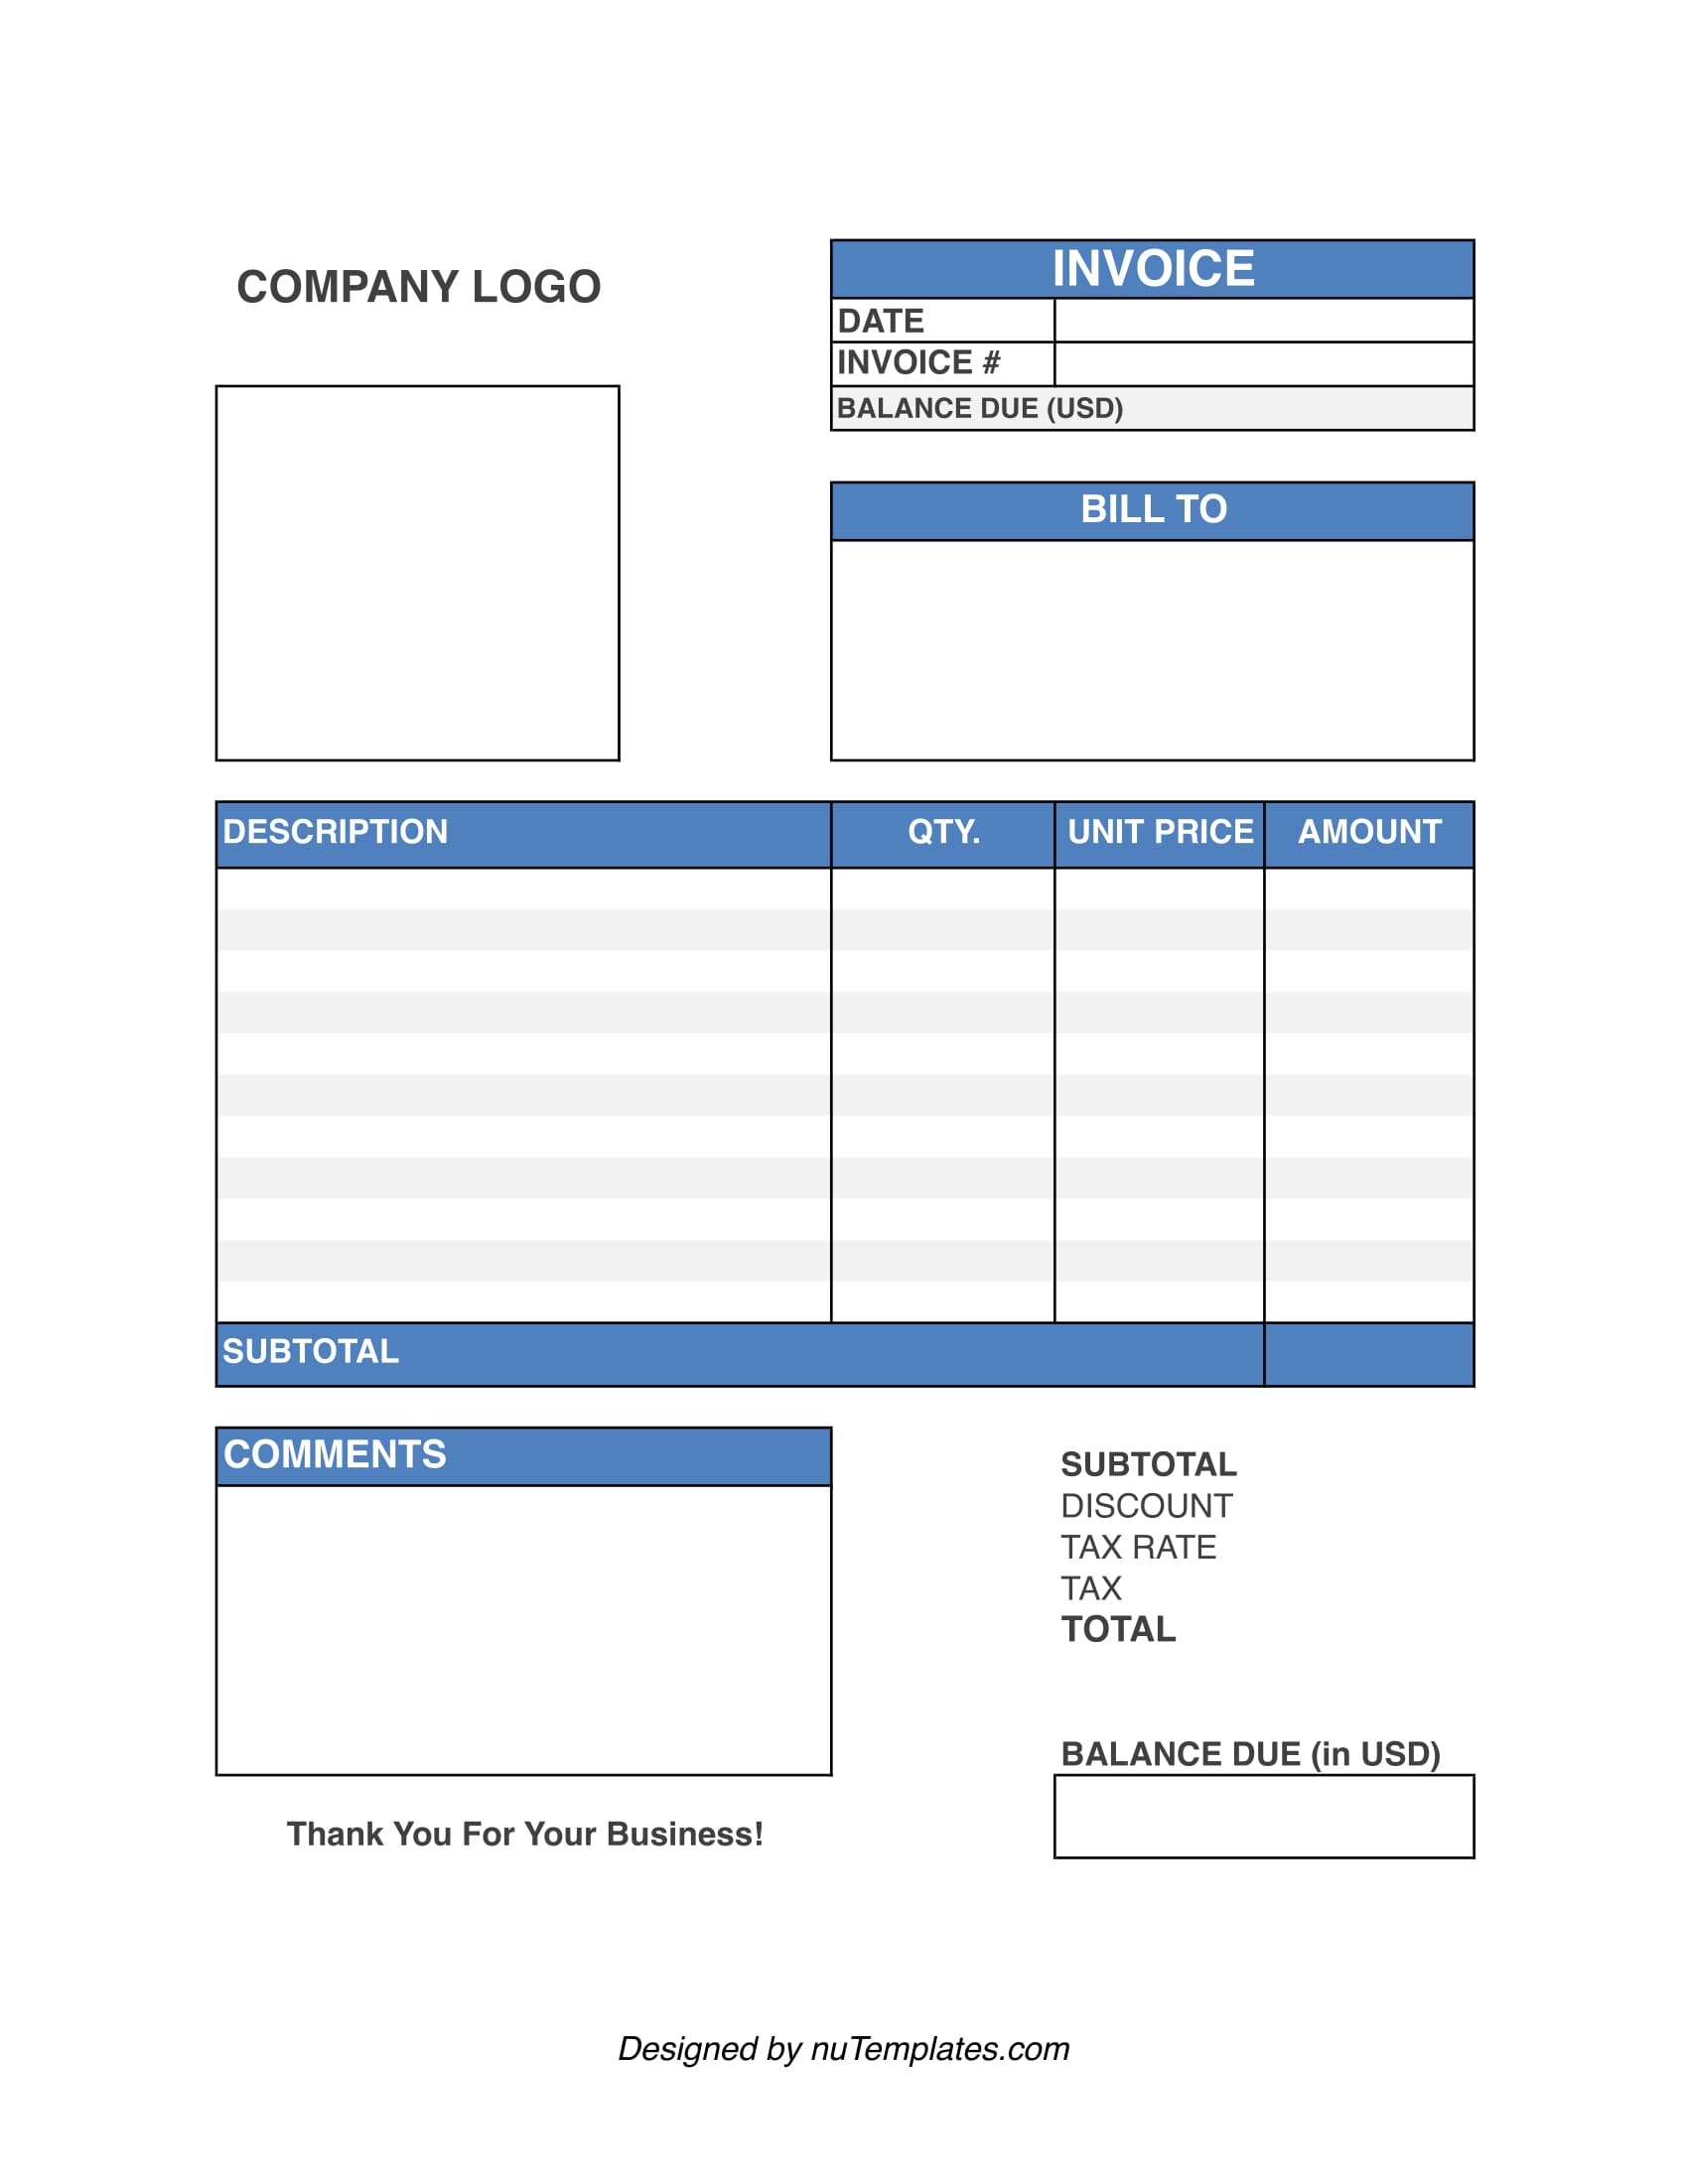 blank invoice template blank invoices nutemplates